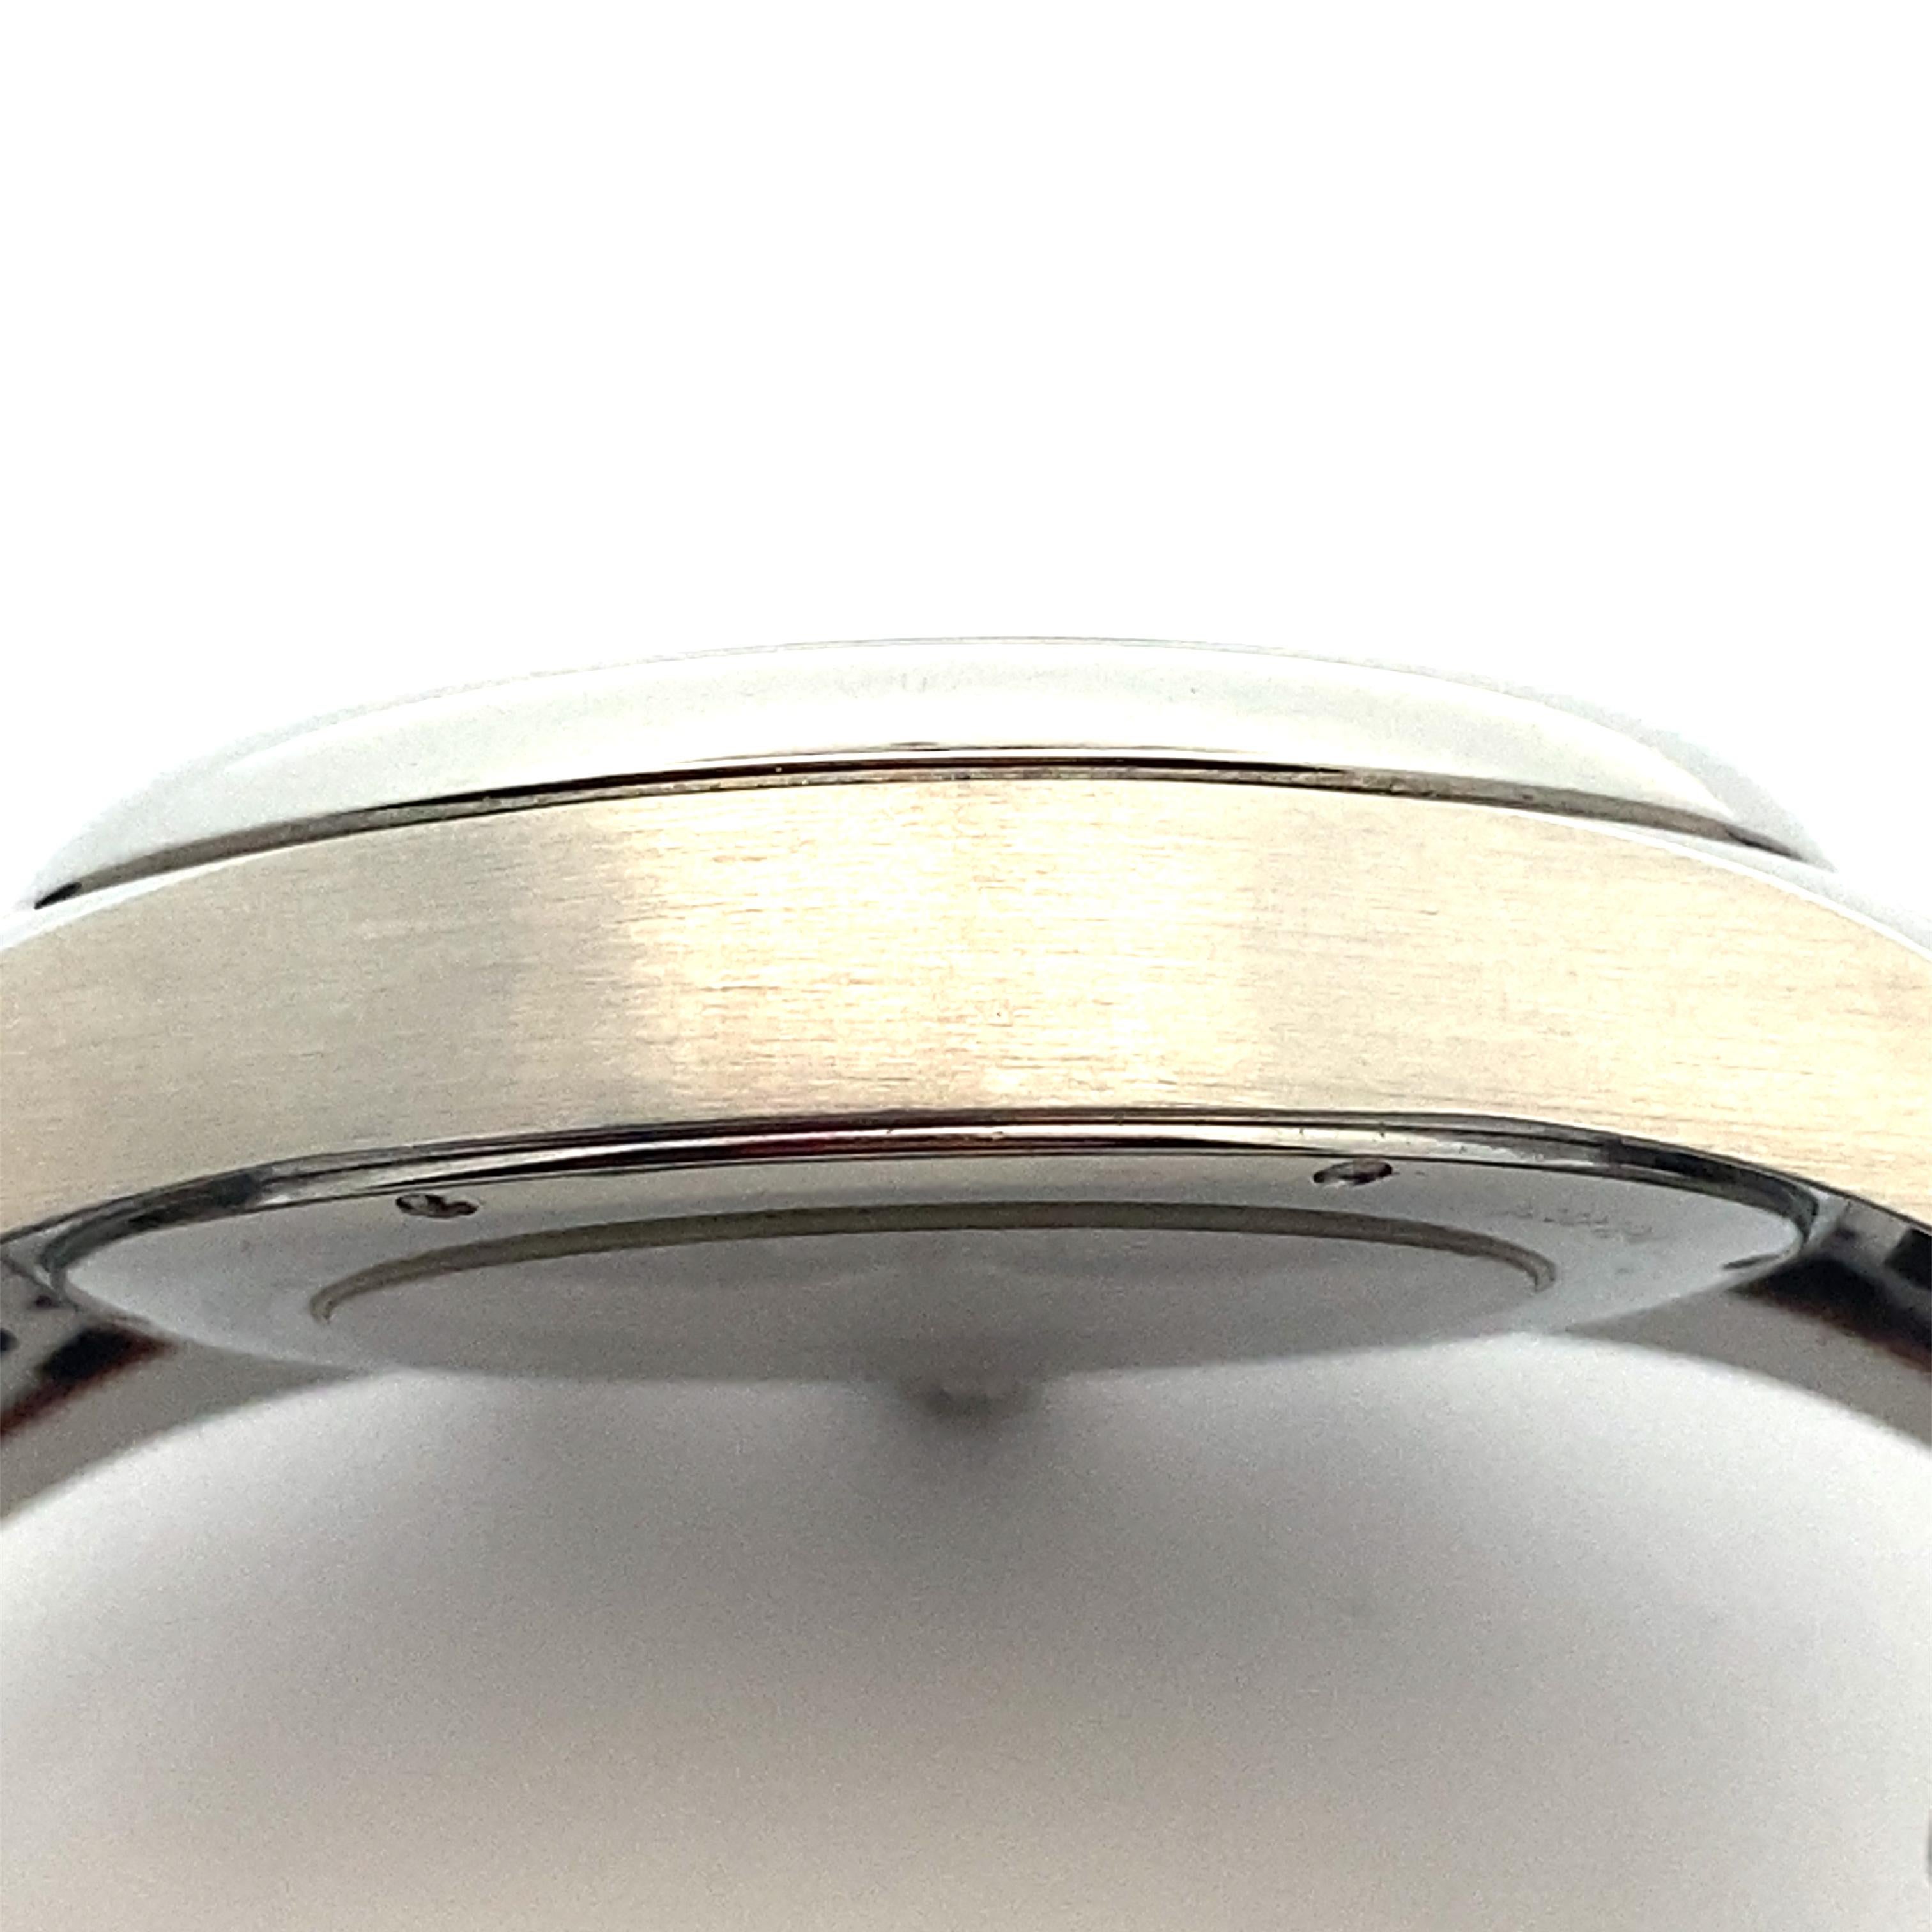 Girard-Perregaux Flyback Stainless Watch Ref. 4958 In Excellent Condition For Sale In Austin, TX